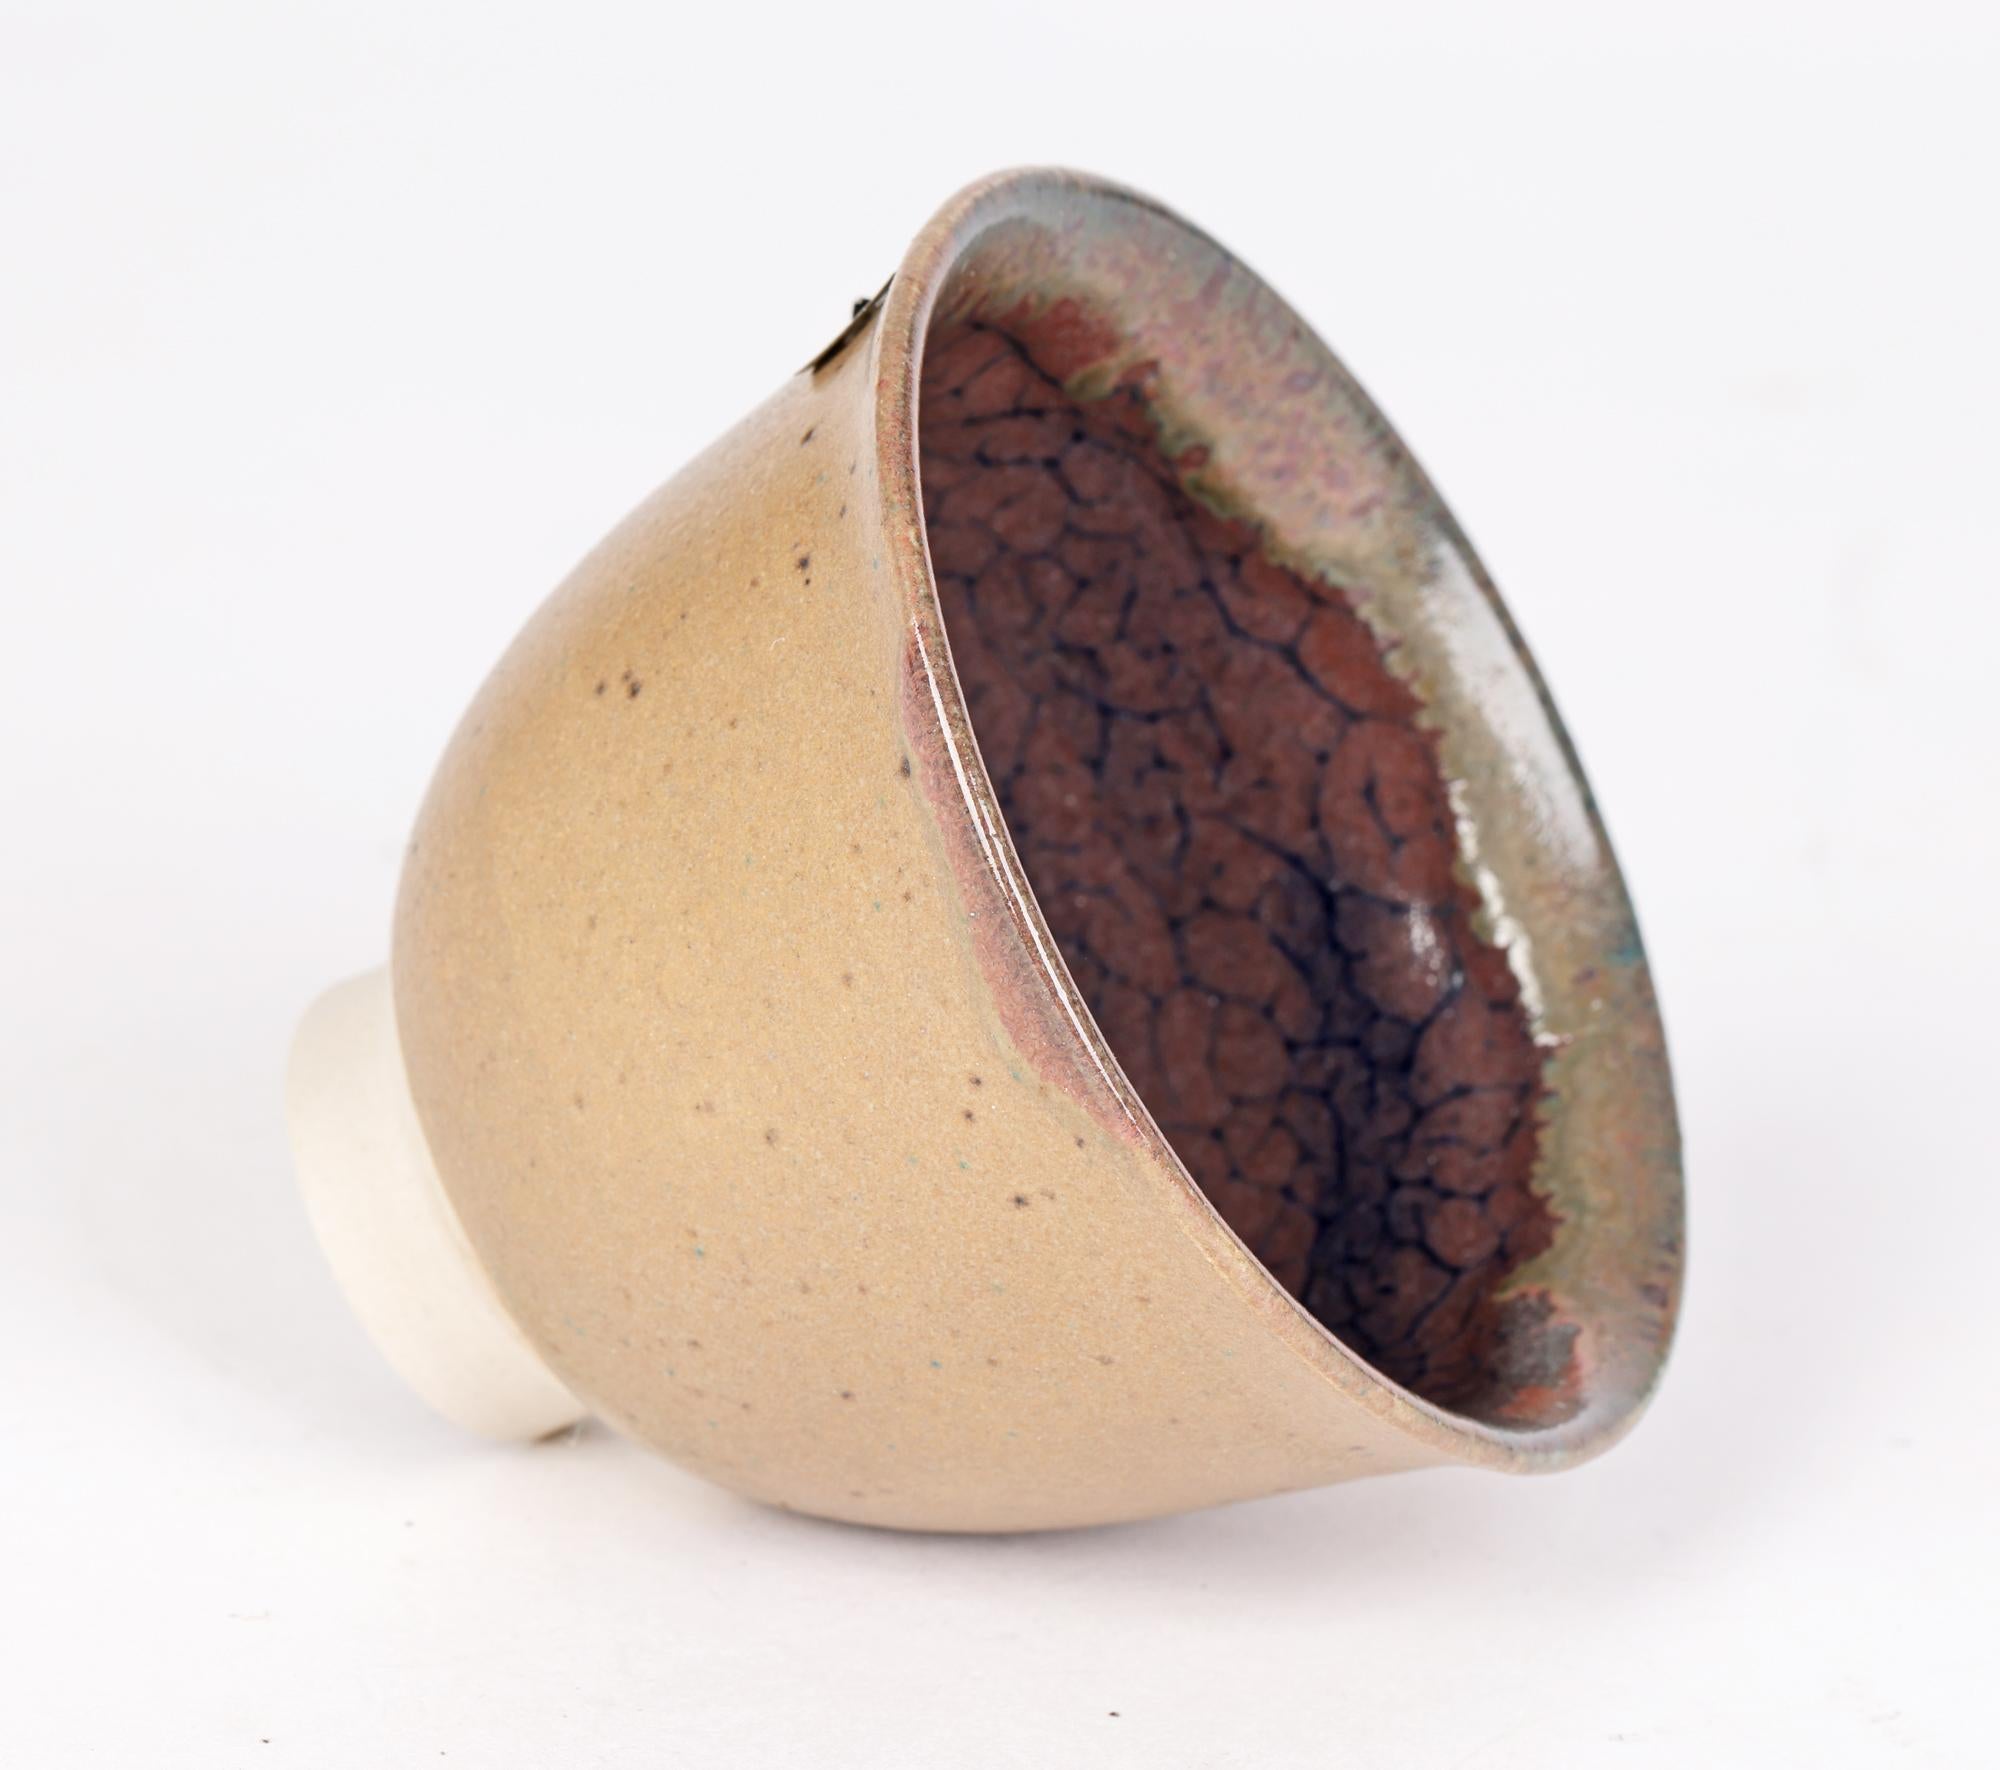 Eric James Mellon Studio Pottery Experimental Glazed Cup, 2006  In Good Condition For Sale In Bishop's Stortford, Hertfordshire